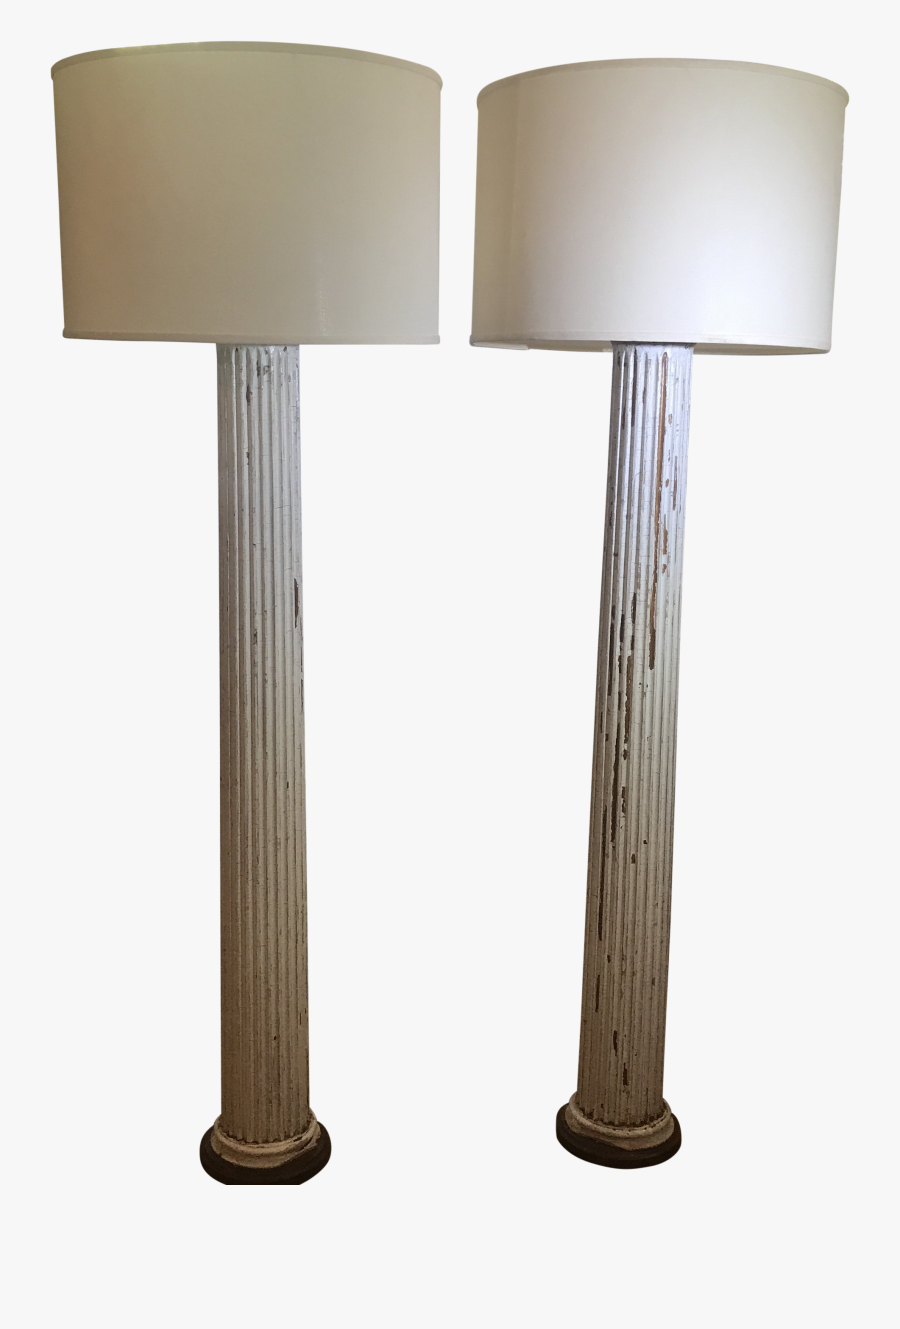 Shabby Floor Lamp Png, Transparent Clipart